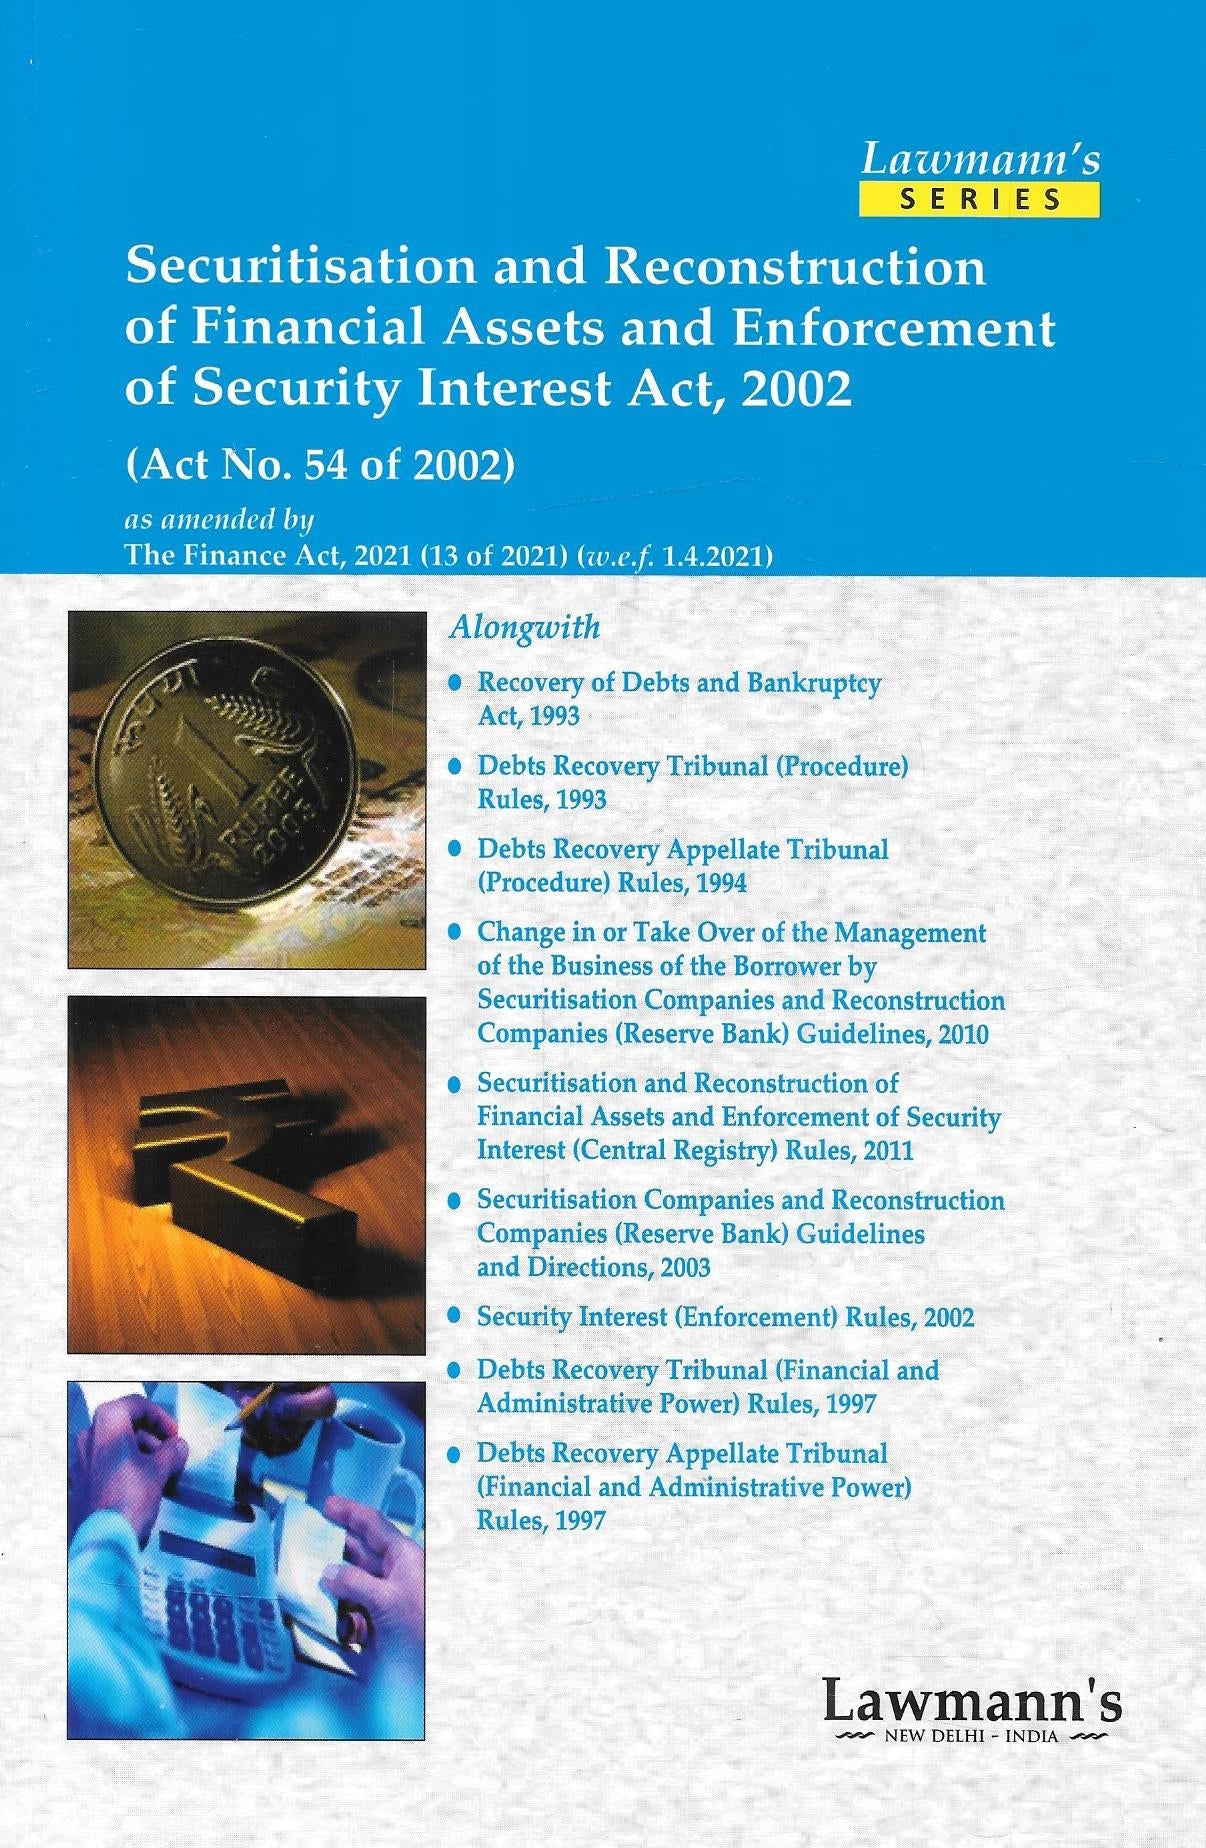 Securitisation and Reconstruction of Financial Assets an Enforcement of Security Interest Act, 2002